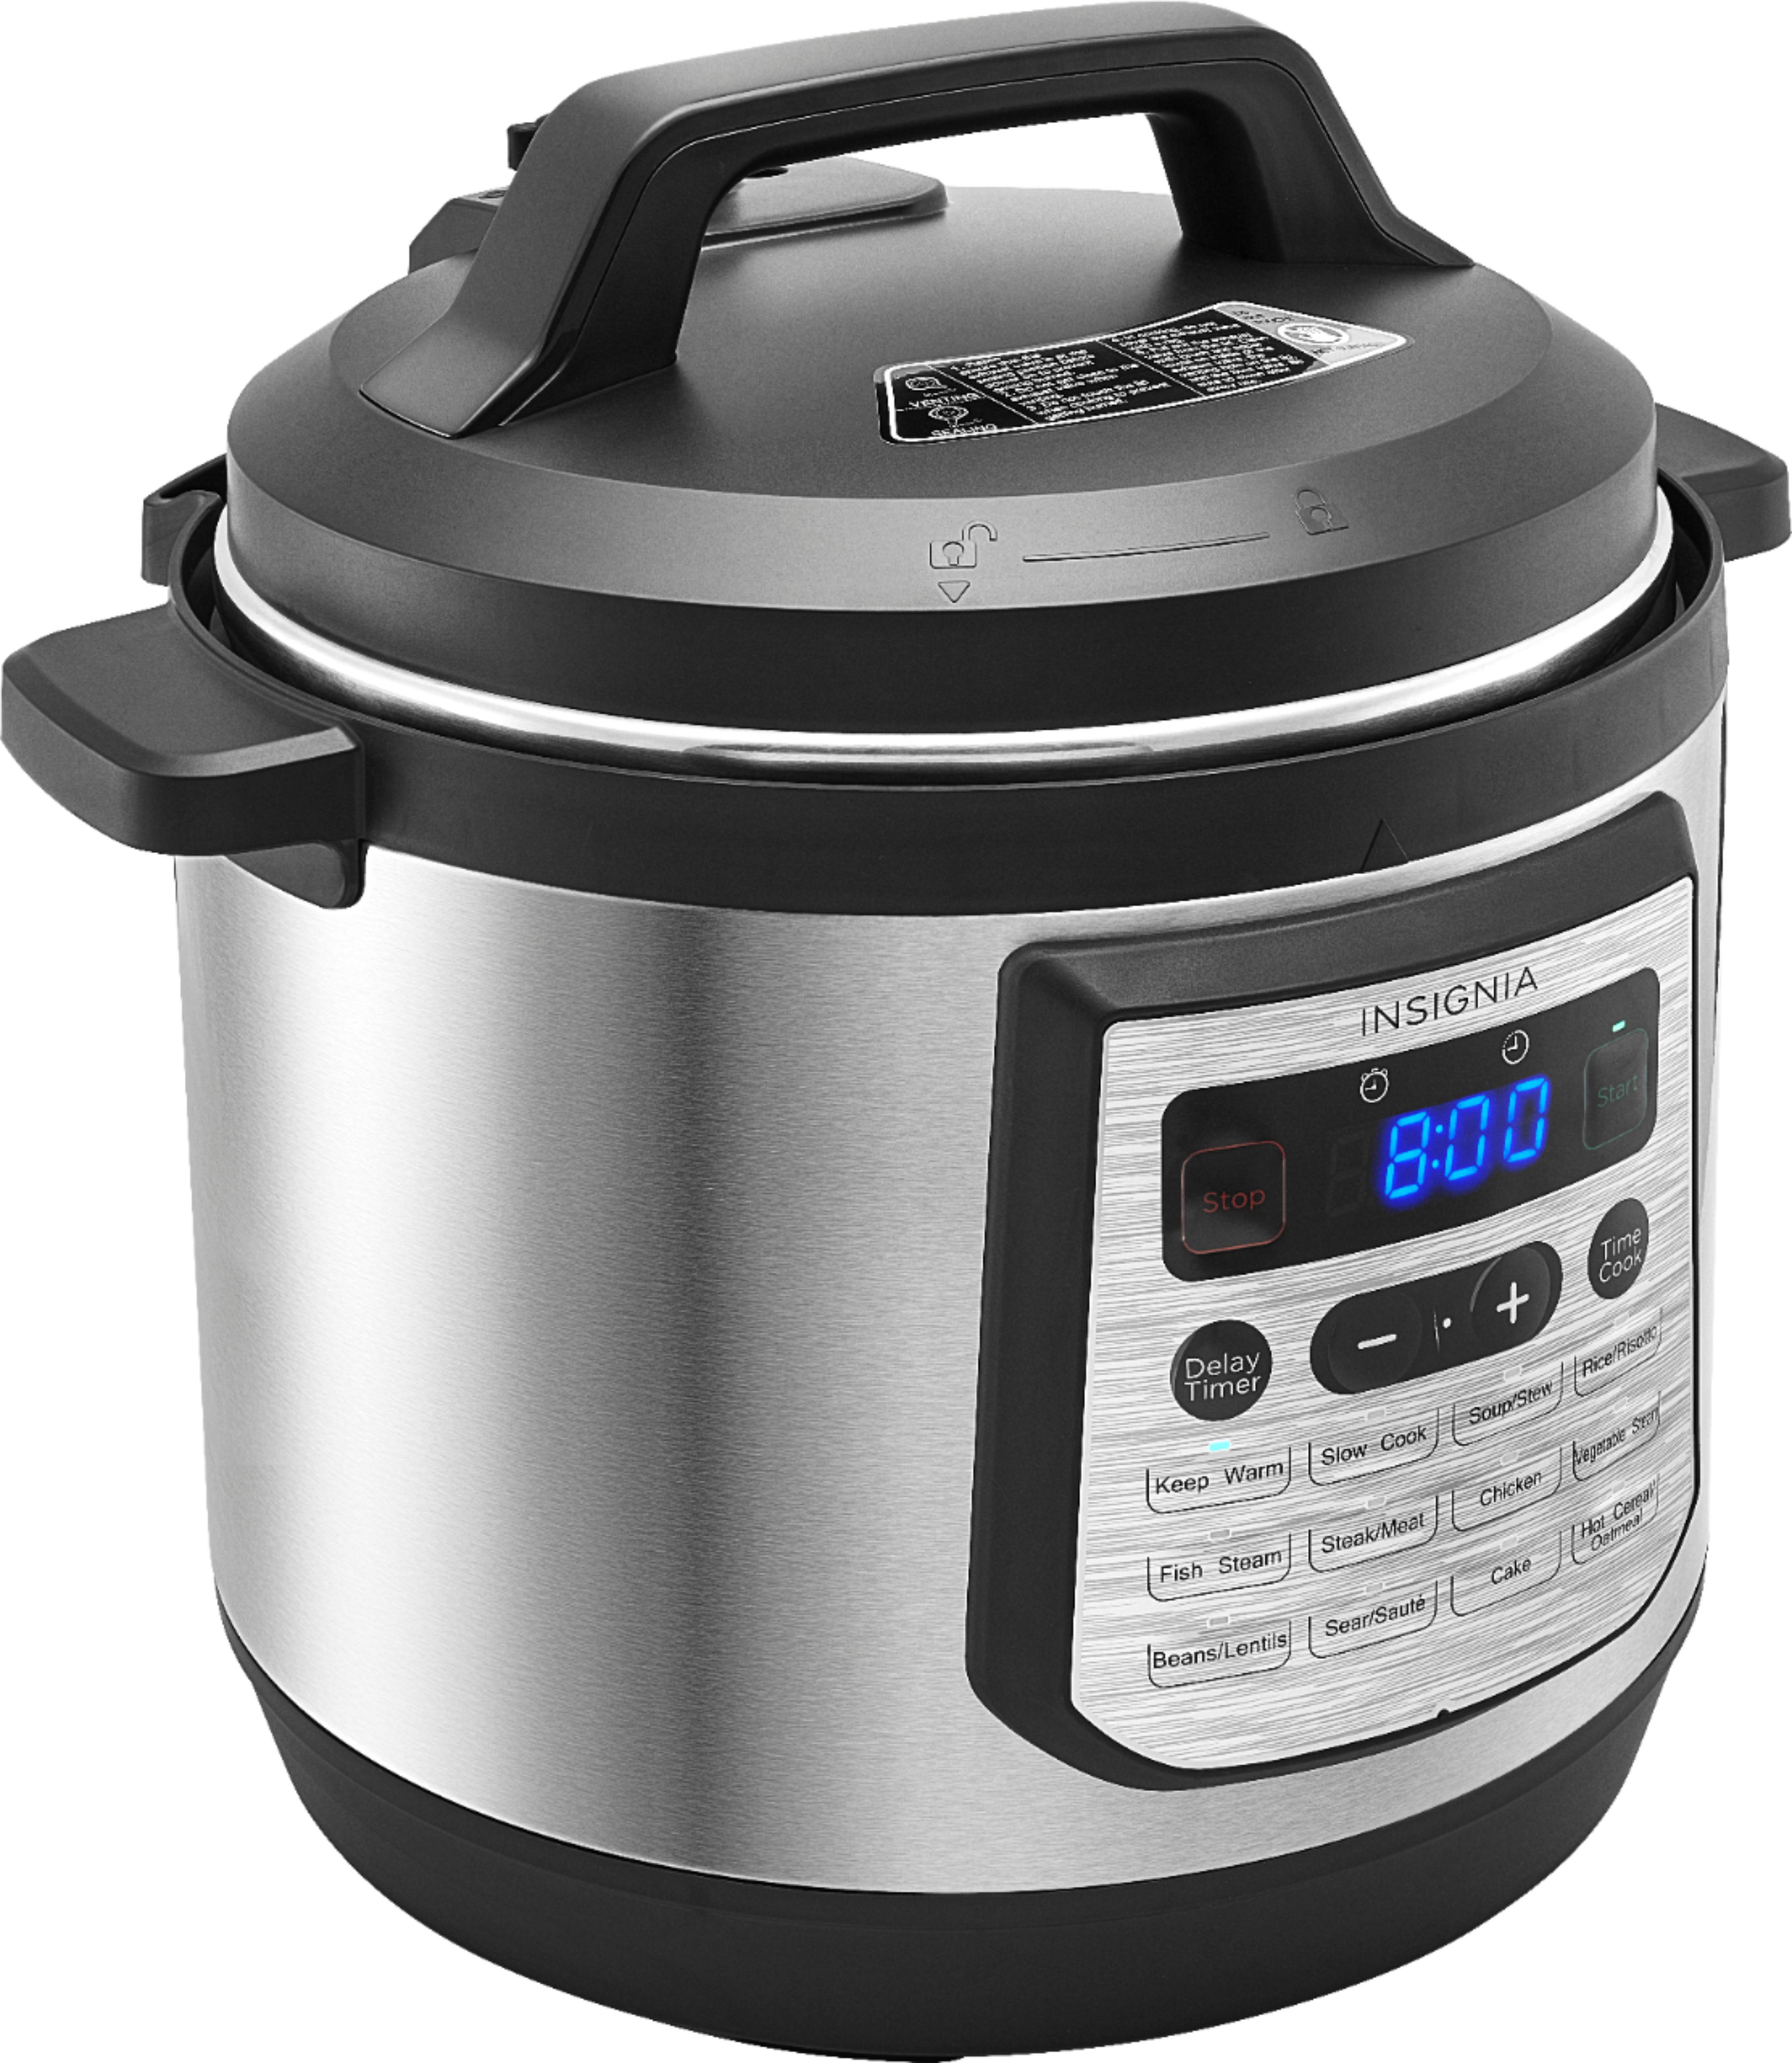 Insignia™ 8qt Digital Multi Cooker Stainless Steel NS-MC80SS9 - $39.99